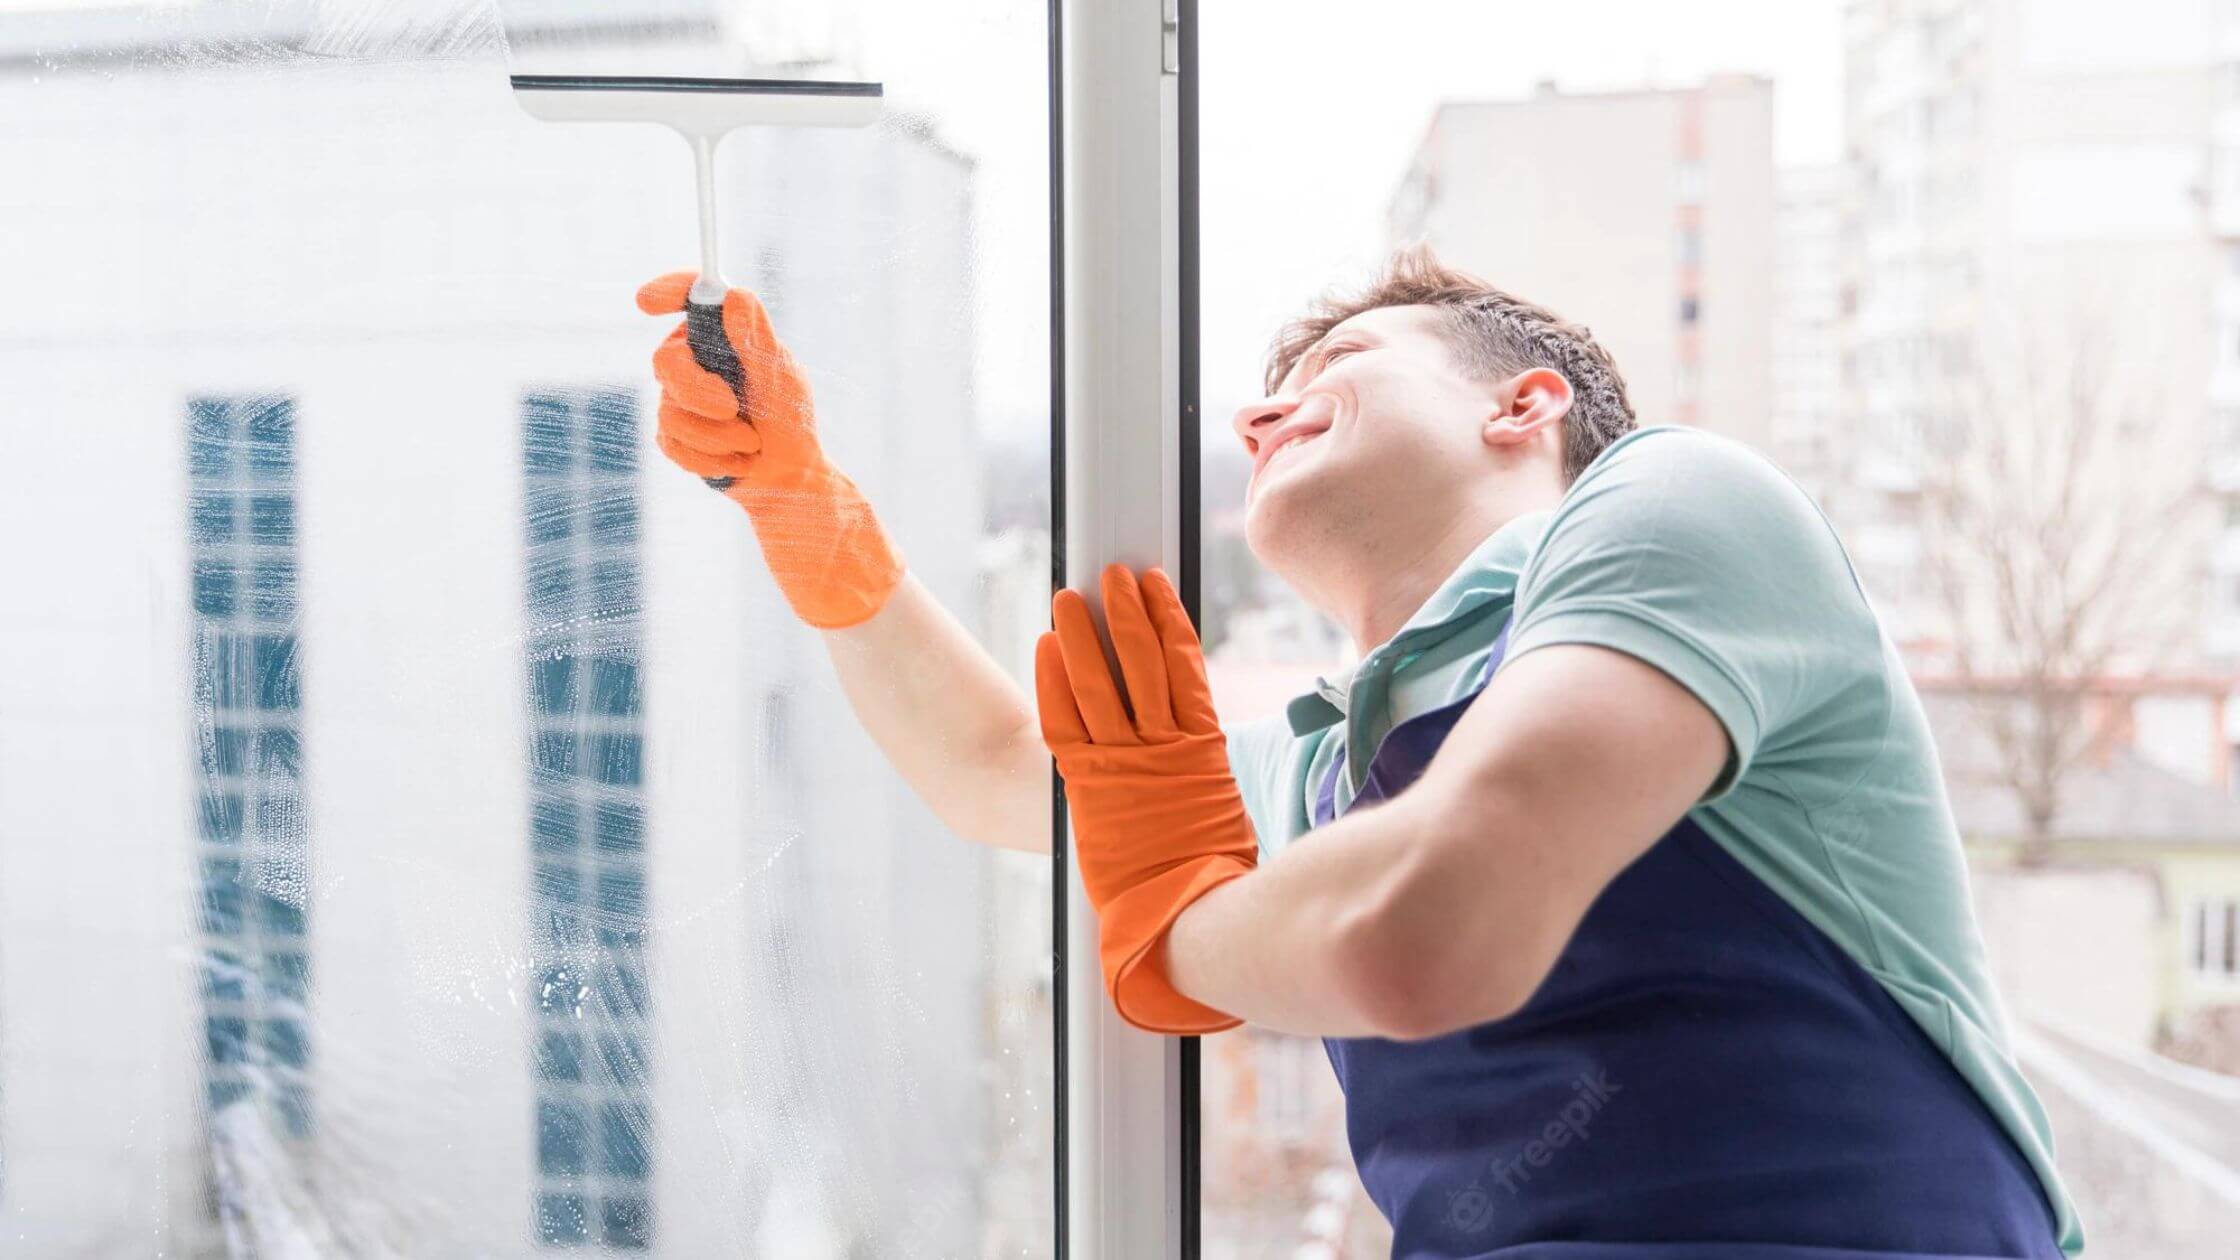 window cleaning services near me